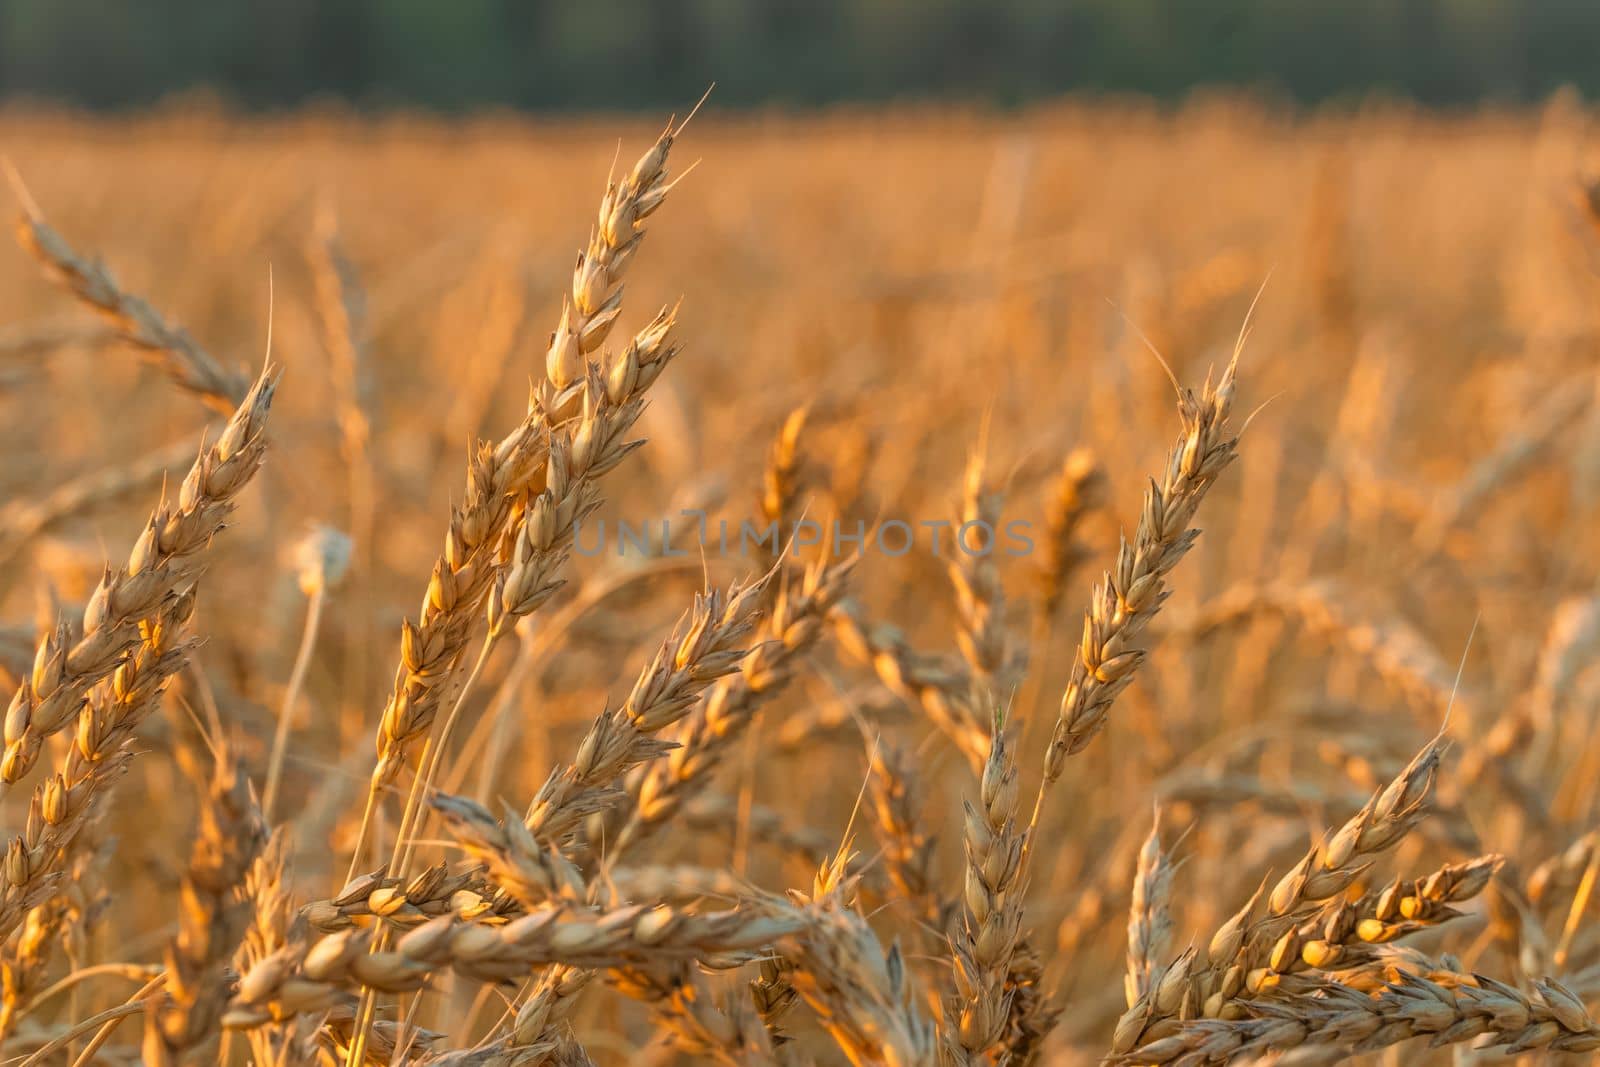 Golden Cereal field with ears of wheat,Agriculture farm and farming concept.Harvest.Wheat field.Rural Scenery.Ripening ears.Rancho harvest Concept.Ripe ears of wheat.Cereal crop.Bread, rye and grain